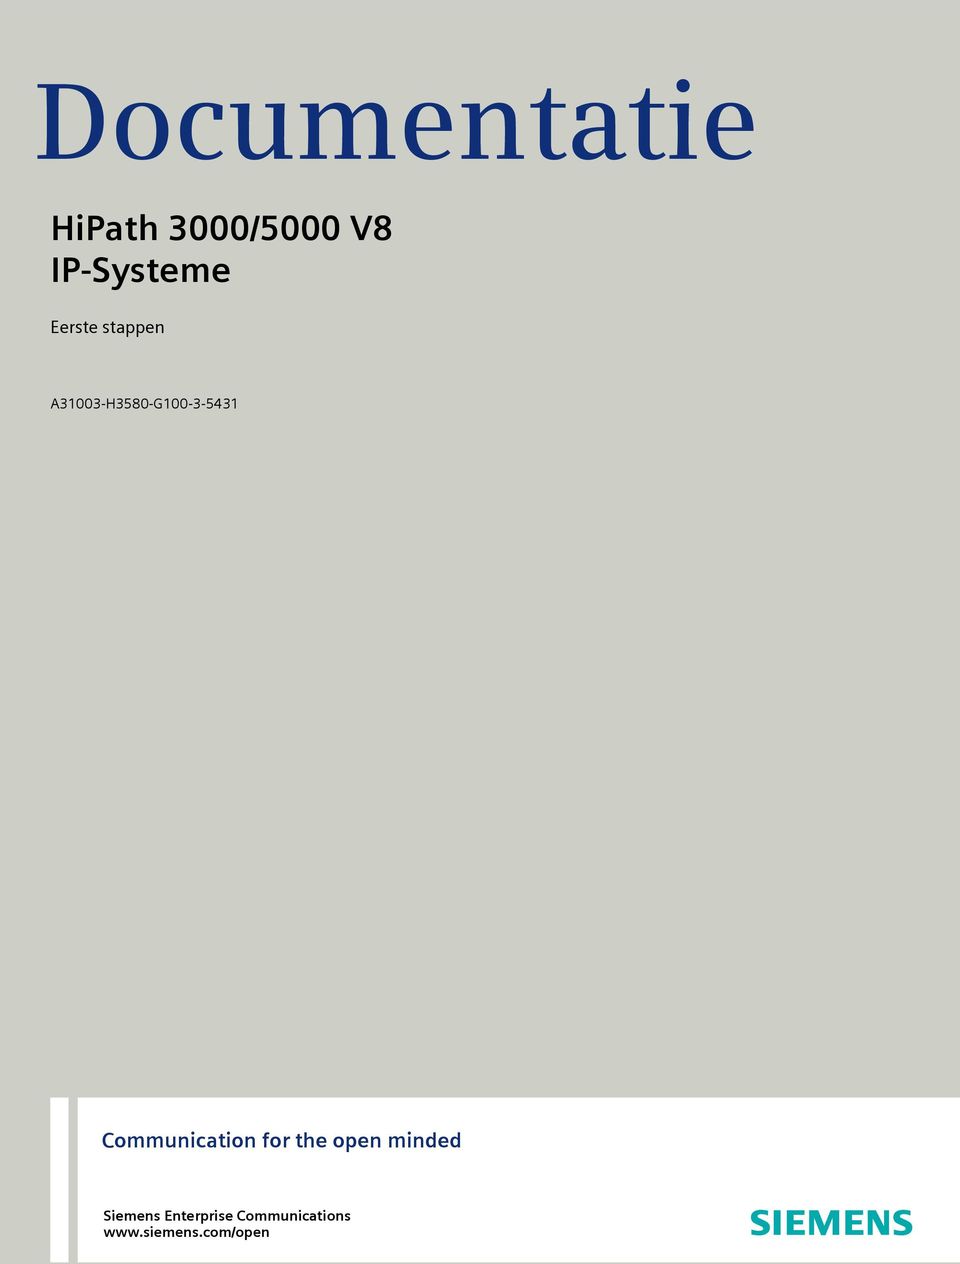 A31003-H3580-G100-3-5431 Communication for